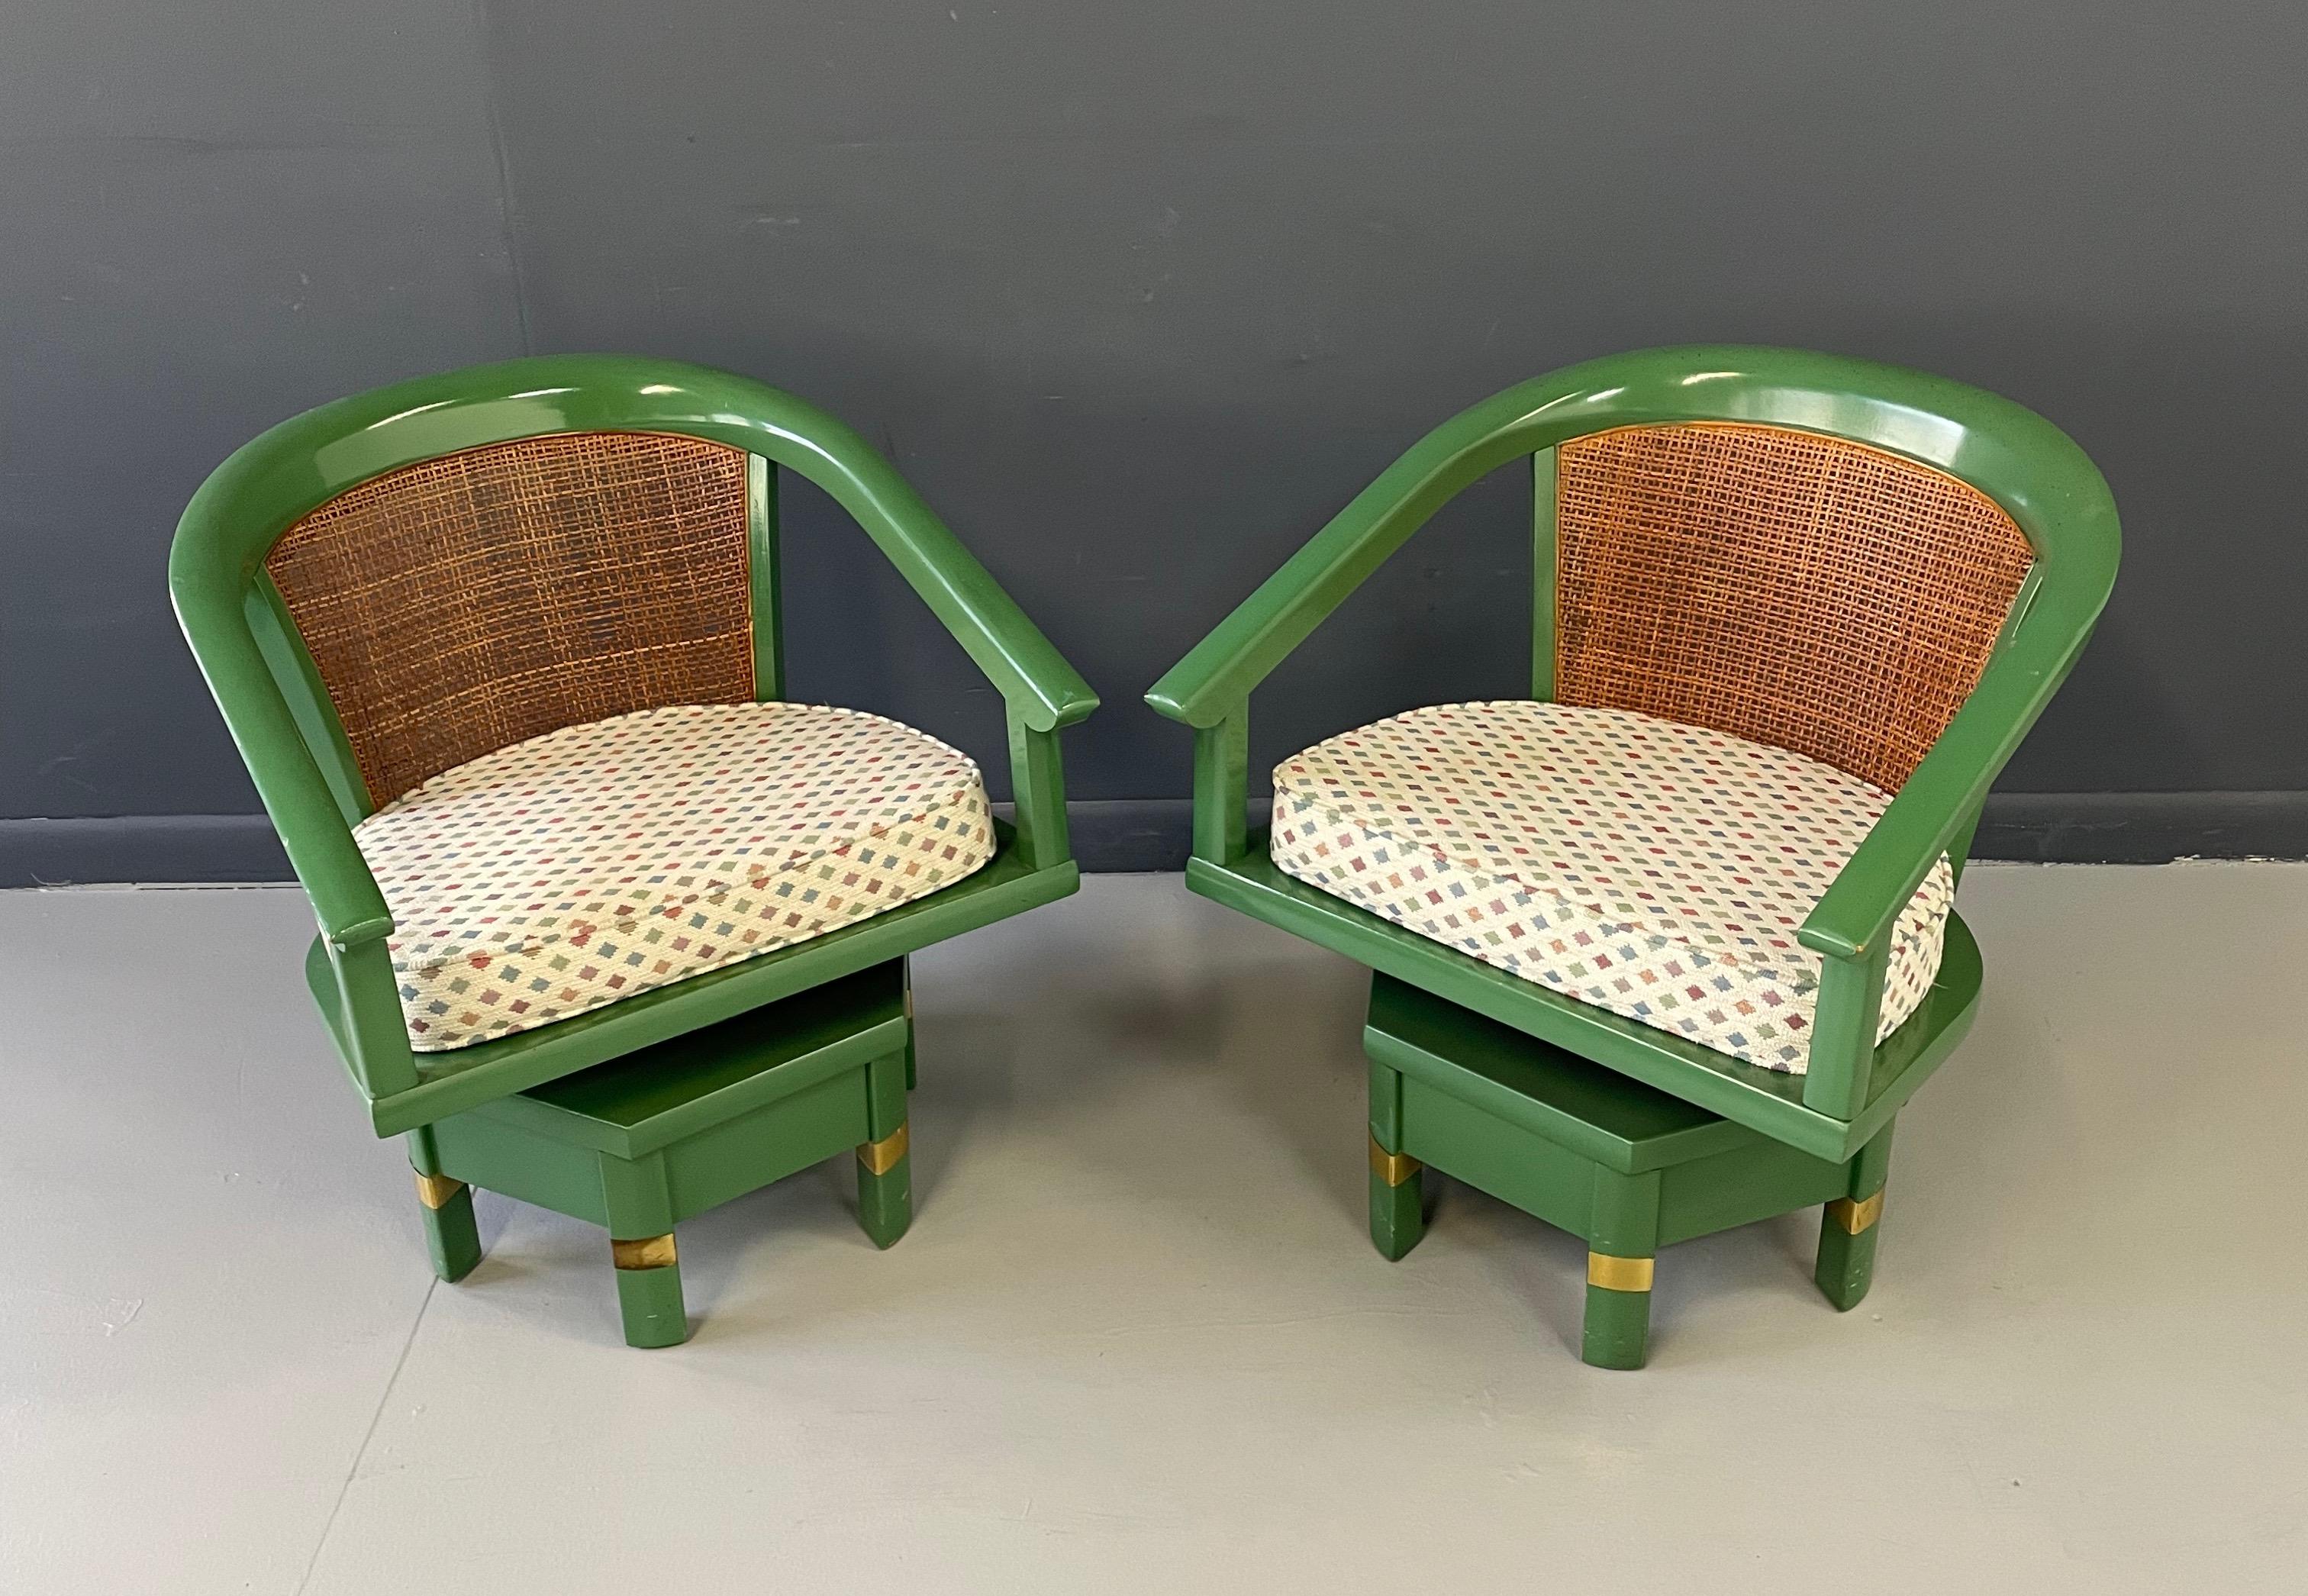 20th Century Trio of Cane Back Swivel Lounge Chairs Designed by Jim Peed for Hickory